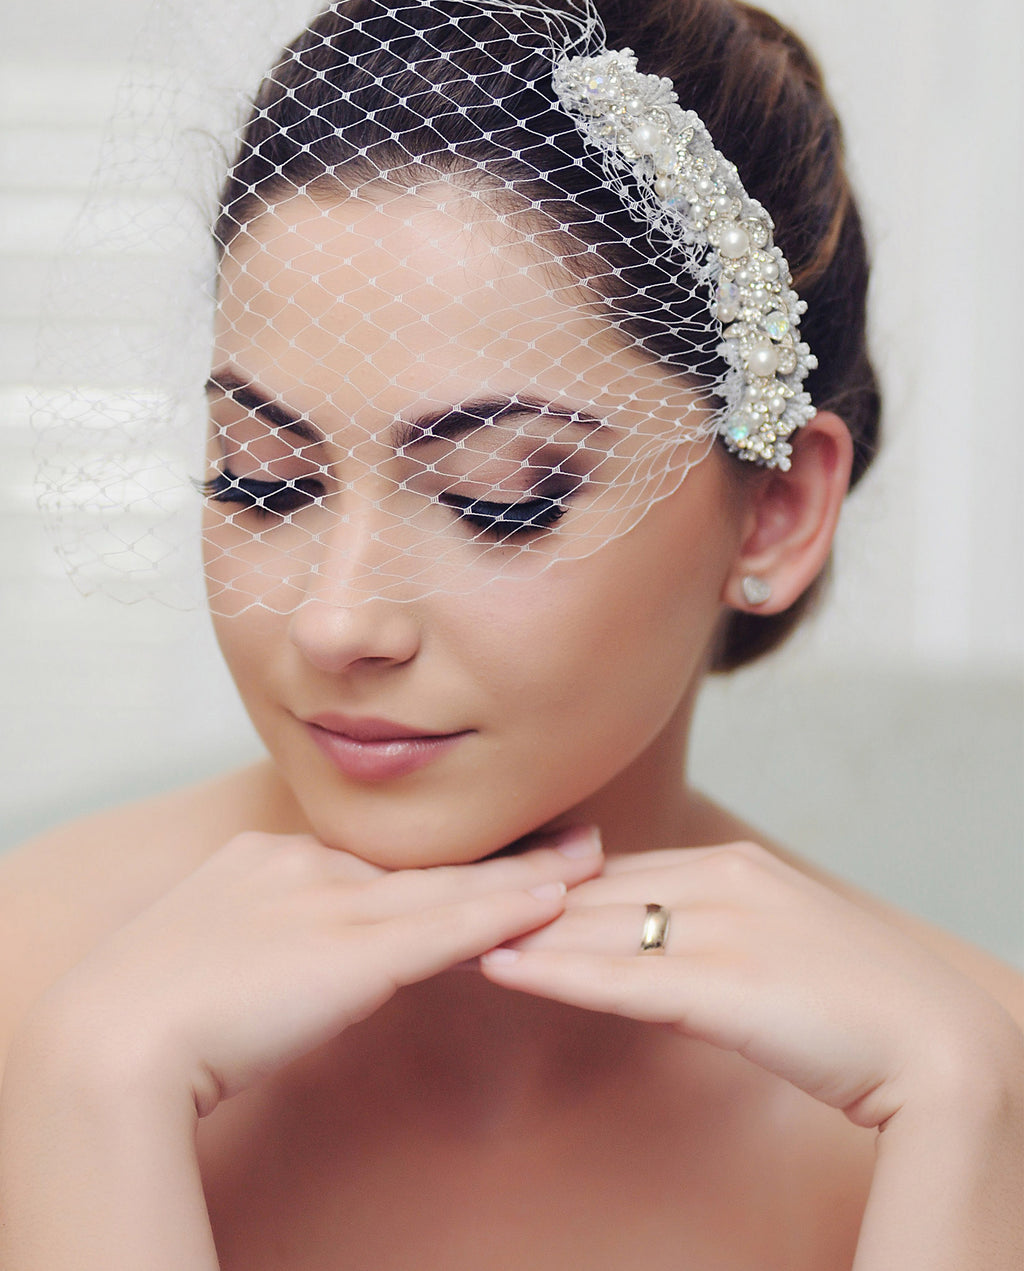 Bridal Dream The most beautiful retro Bridal Veil sculpture bandeau style is all mounted in two sparkling hair combs, to hold your hair in place while you dance under the lights like the Great Gatsby movie stars.